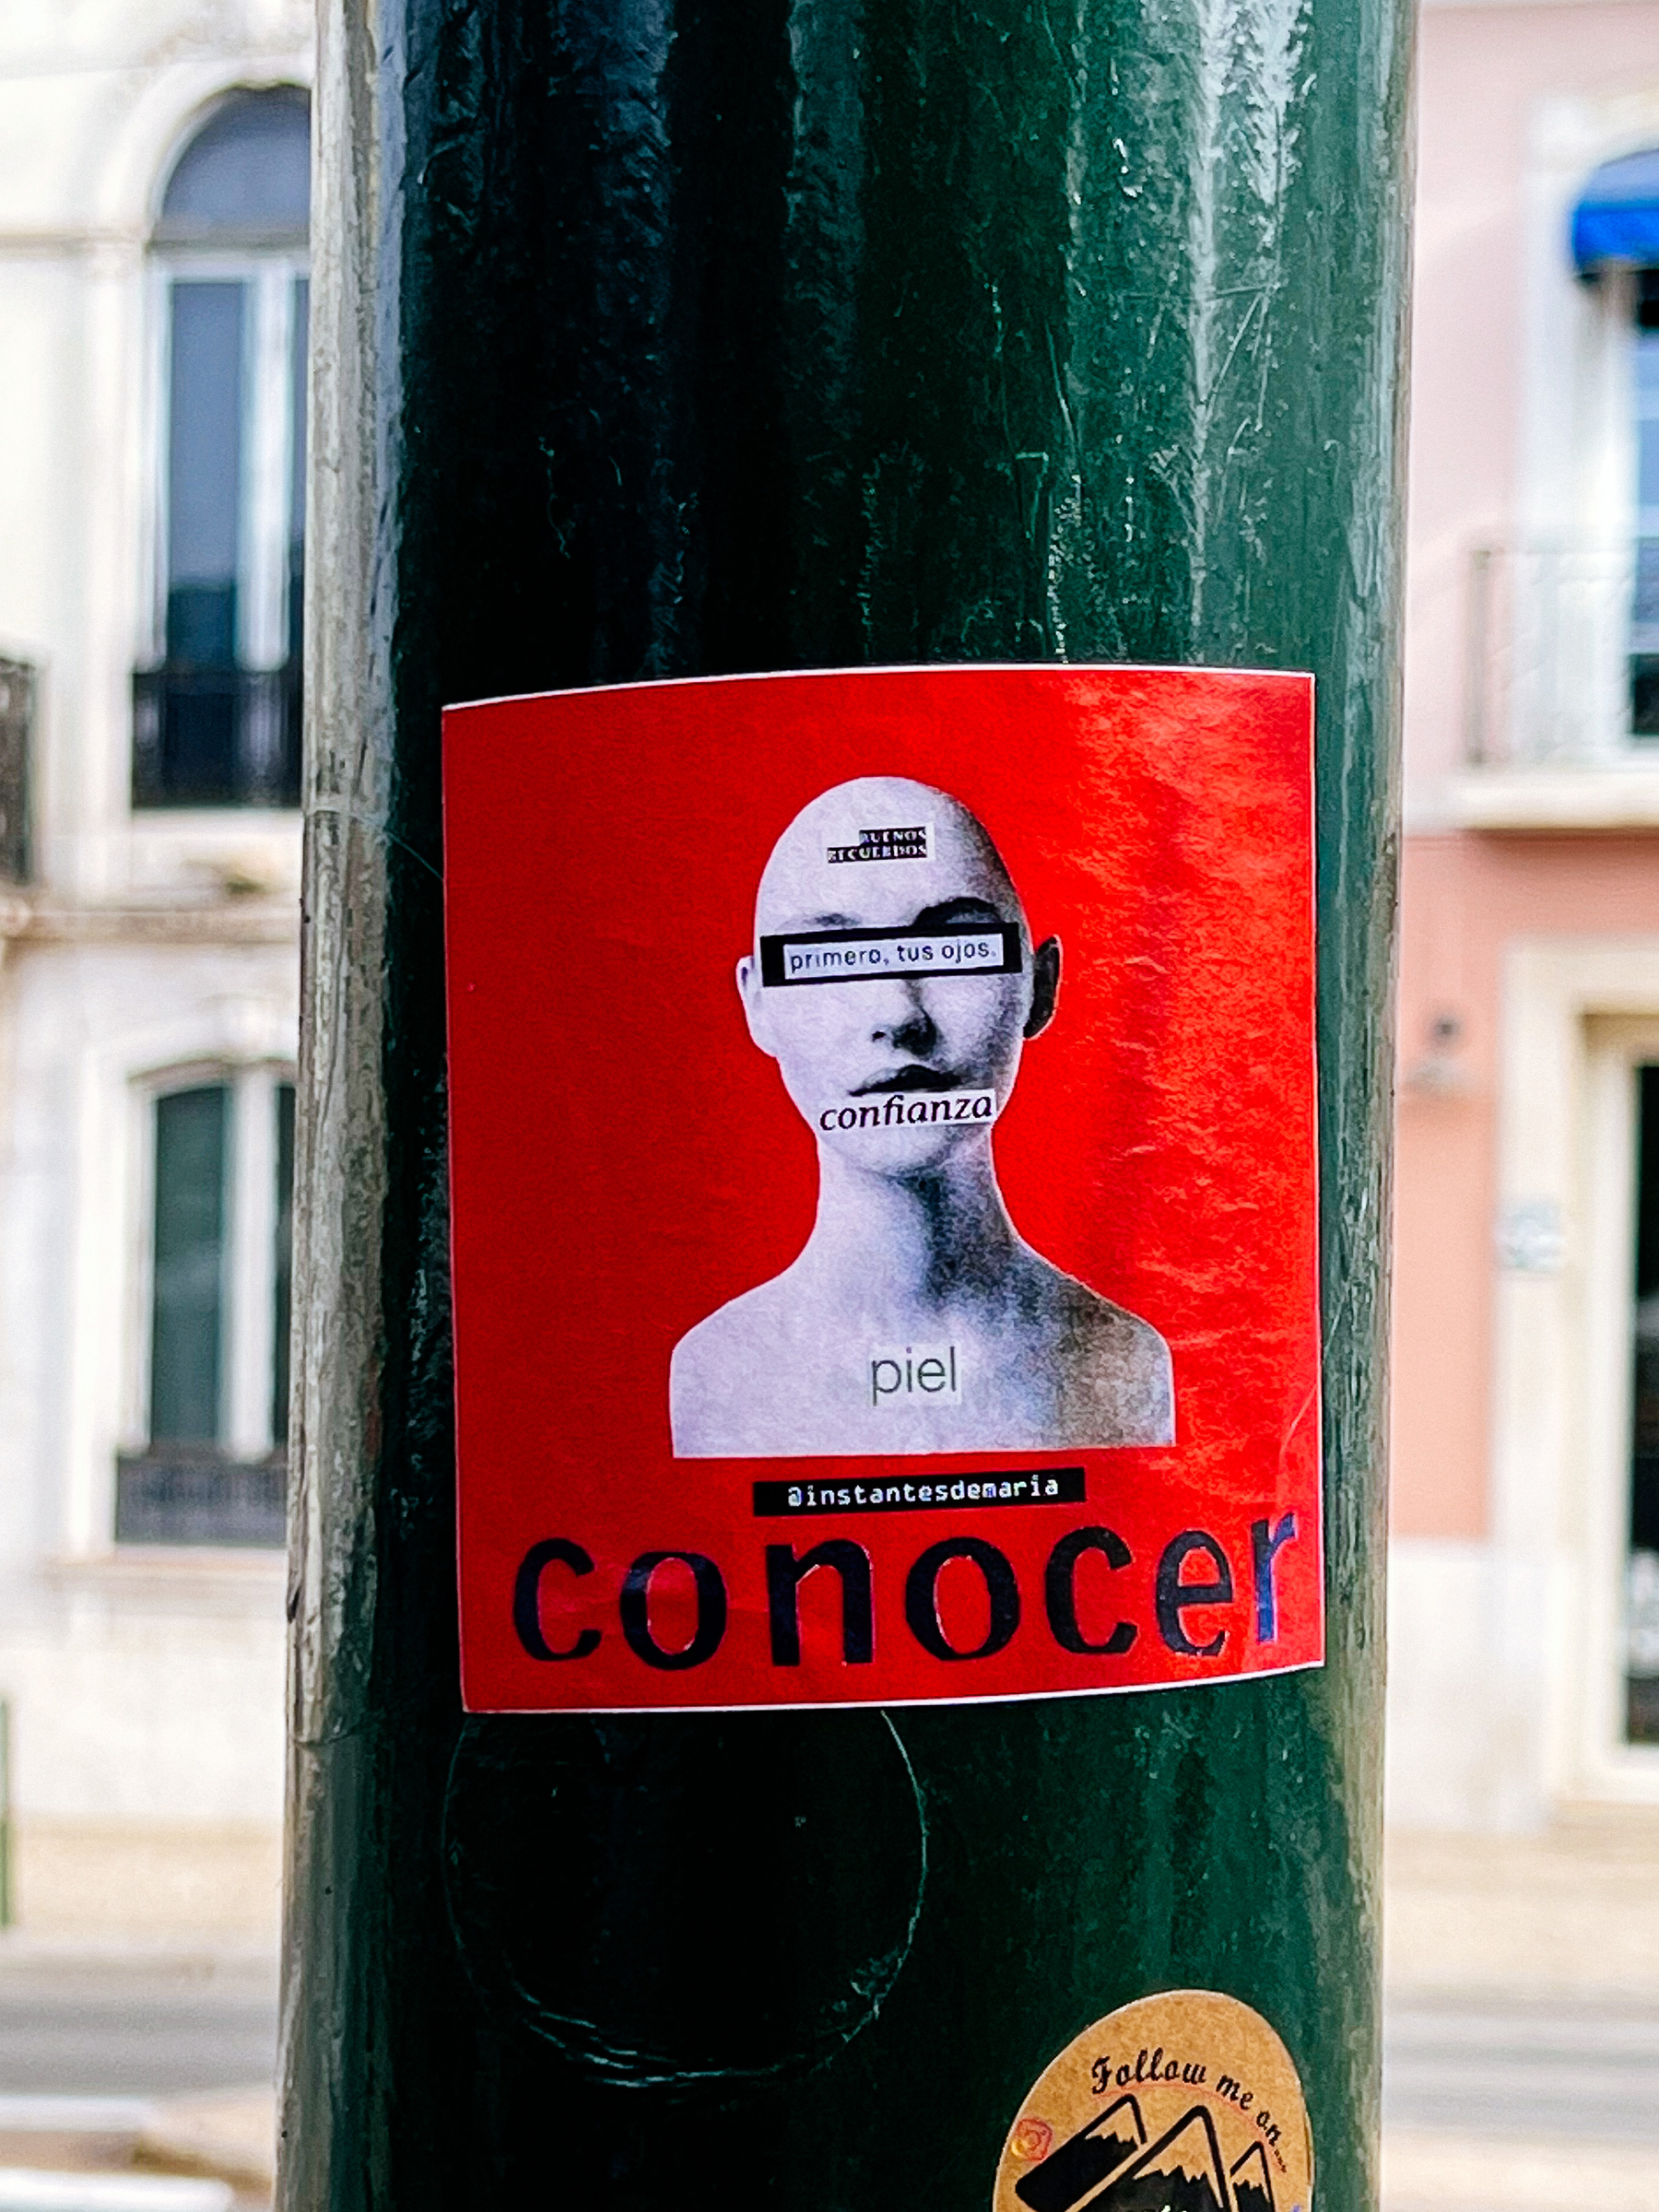 Sticker with the face of a bald woman, and the words “primero, tus ojos”, “confianza”, “piel”, “conocer” over her face.